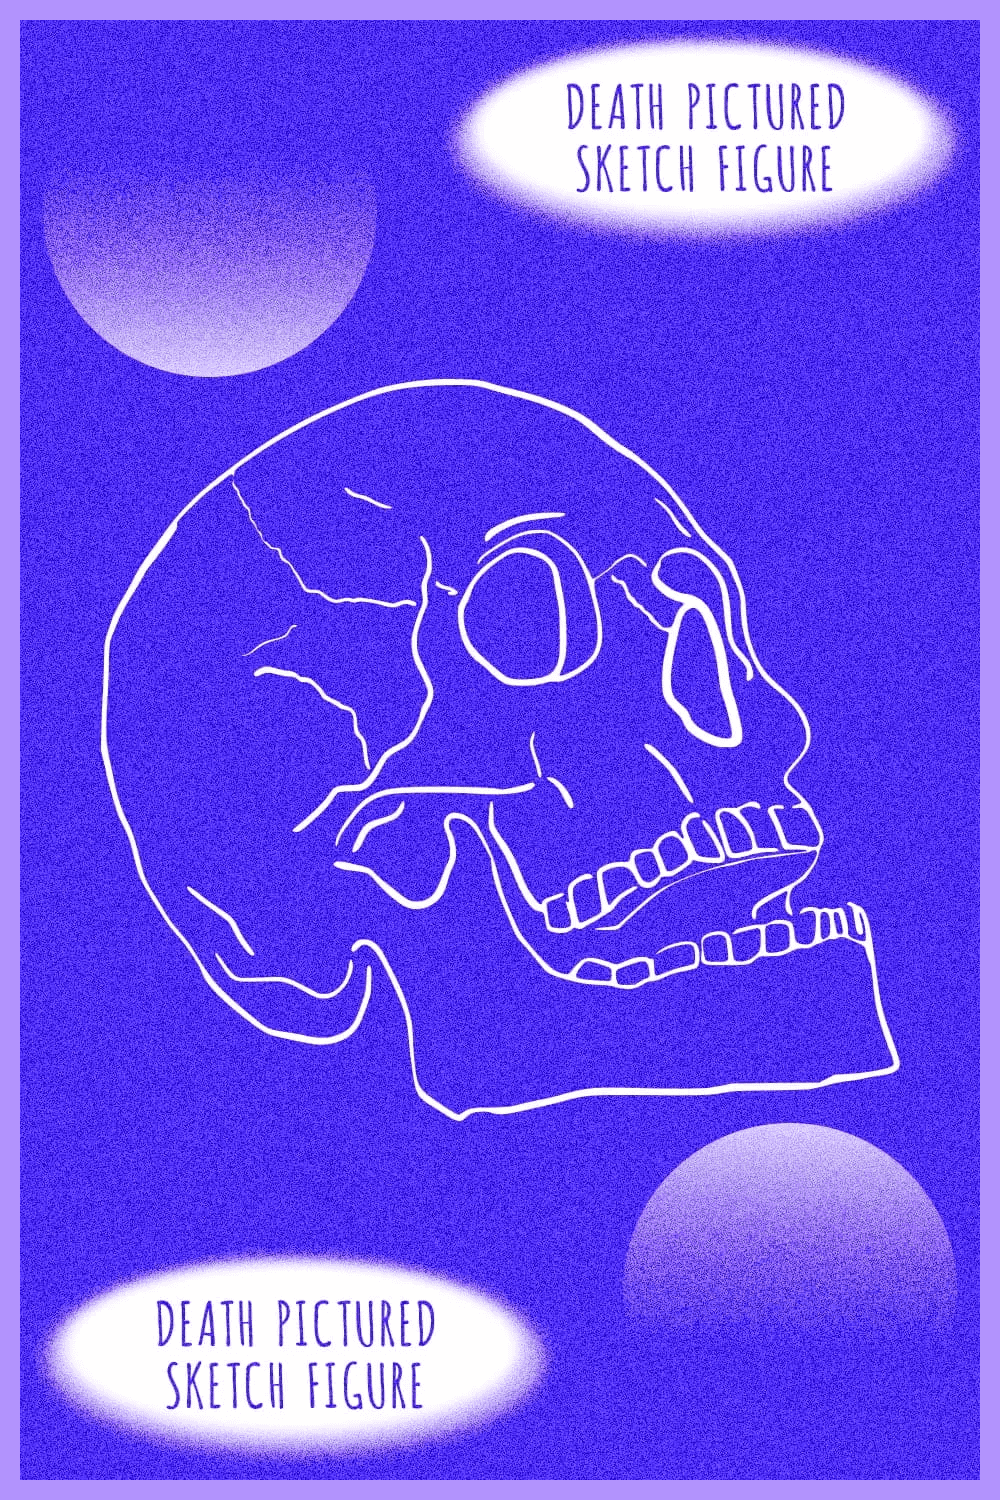 White silhouette of a skull on a blue background.